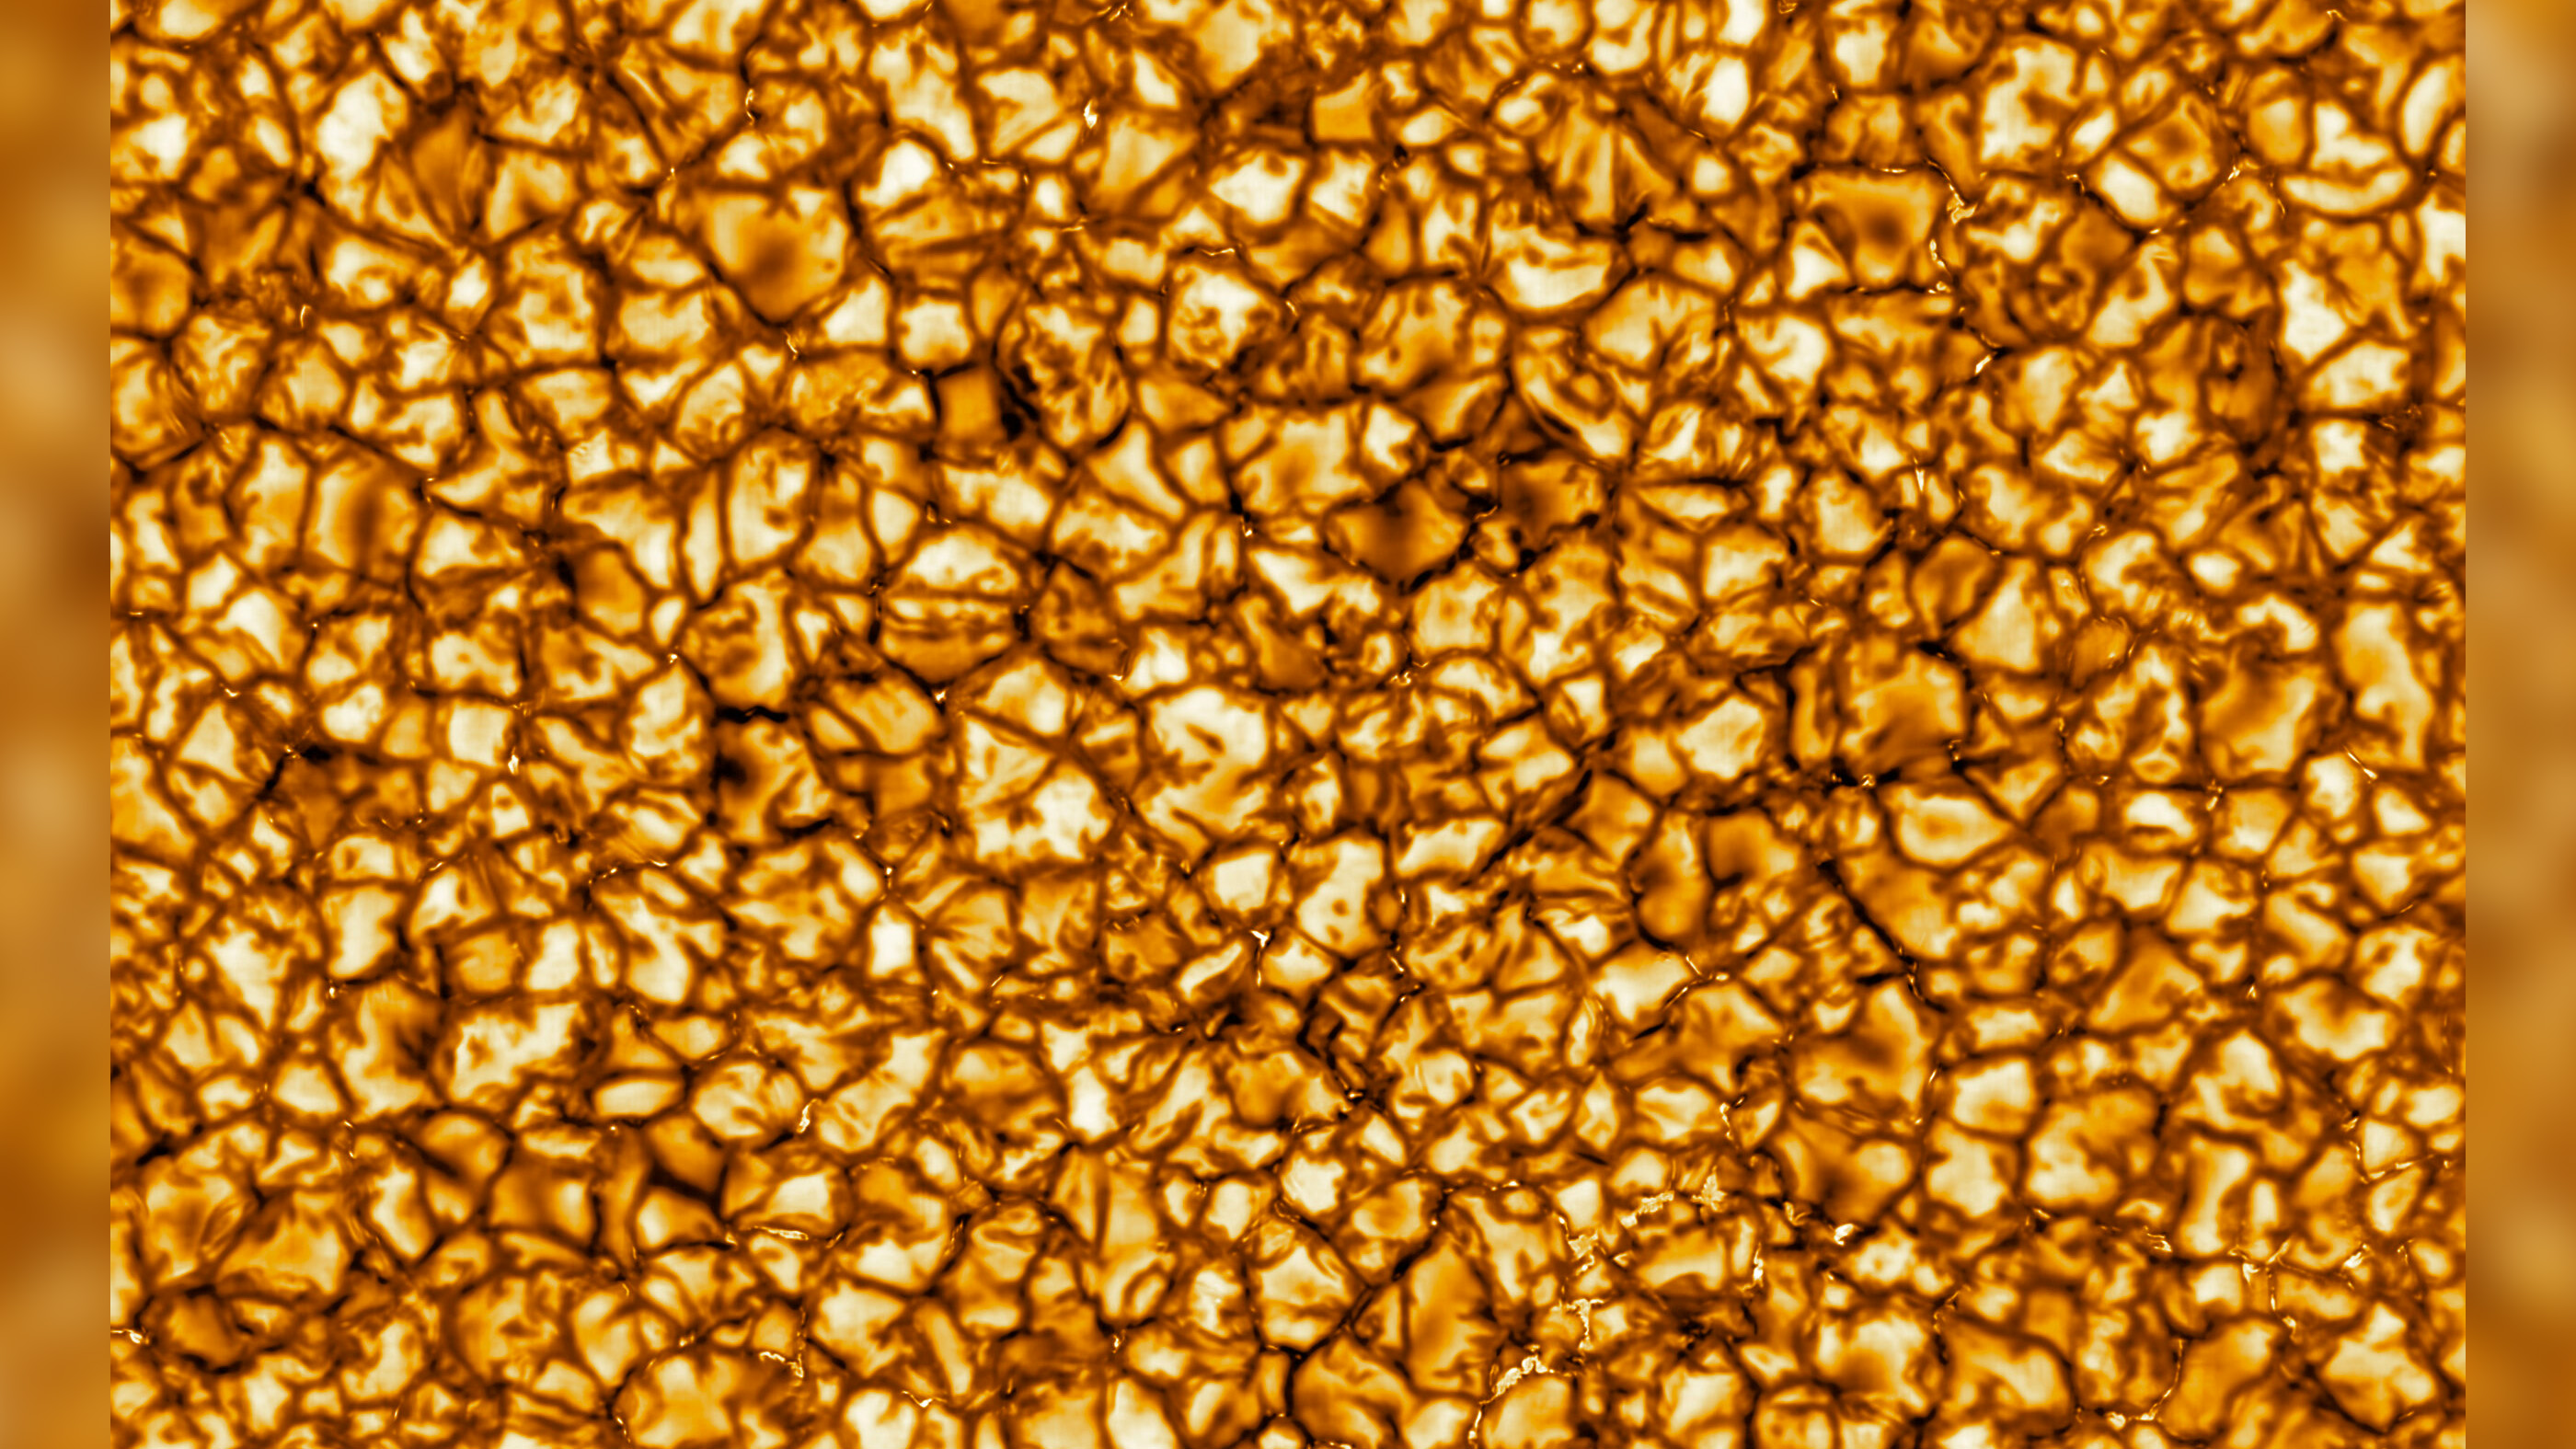 The Daniel K. Inouye Solar Telescope's first published image of the sun is the highest-resolution image of our star to date.